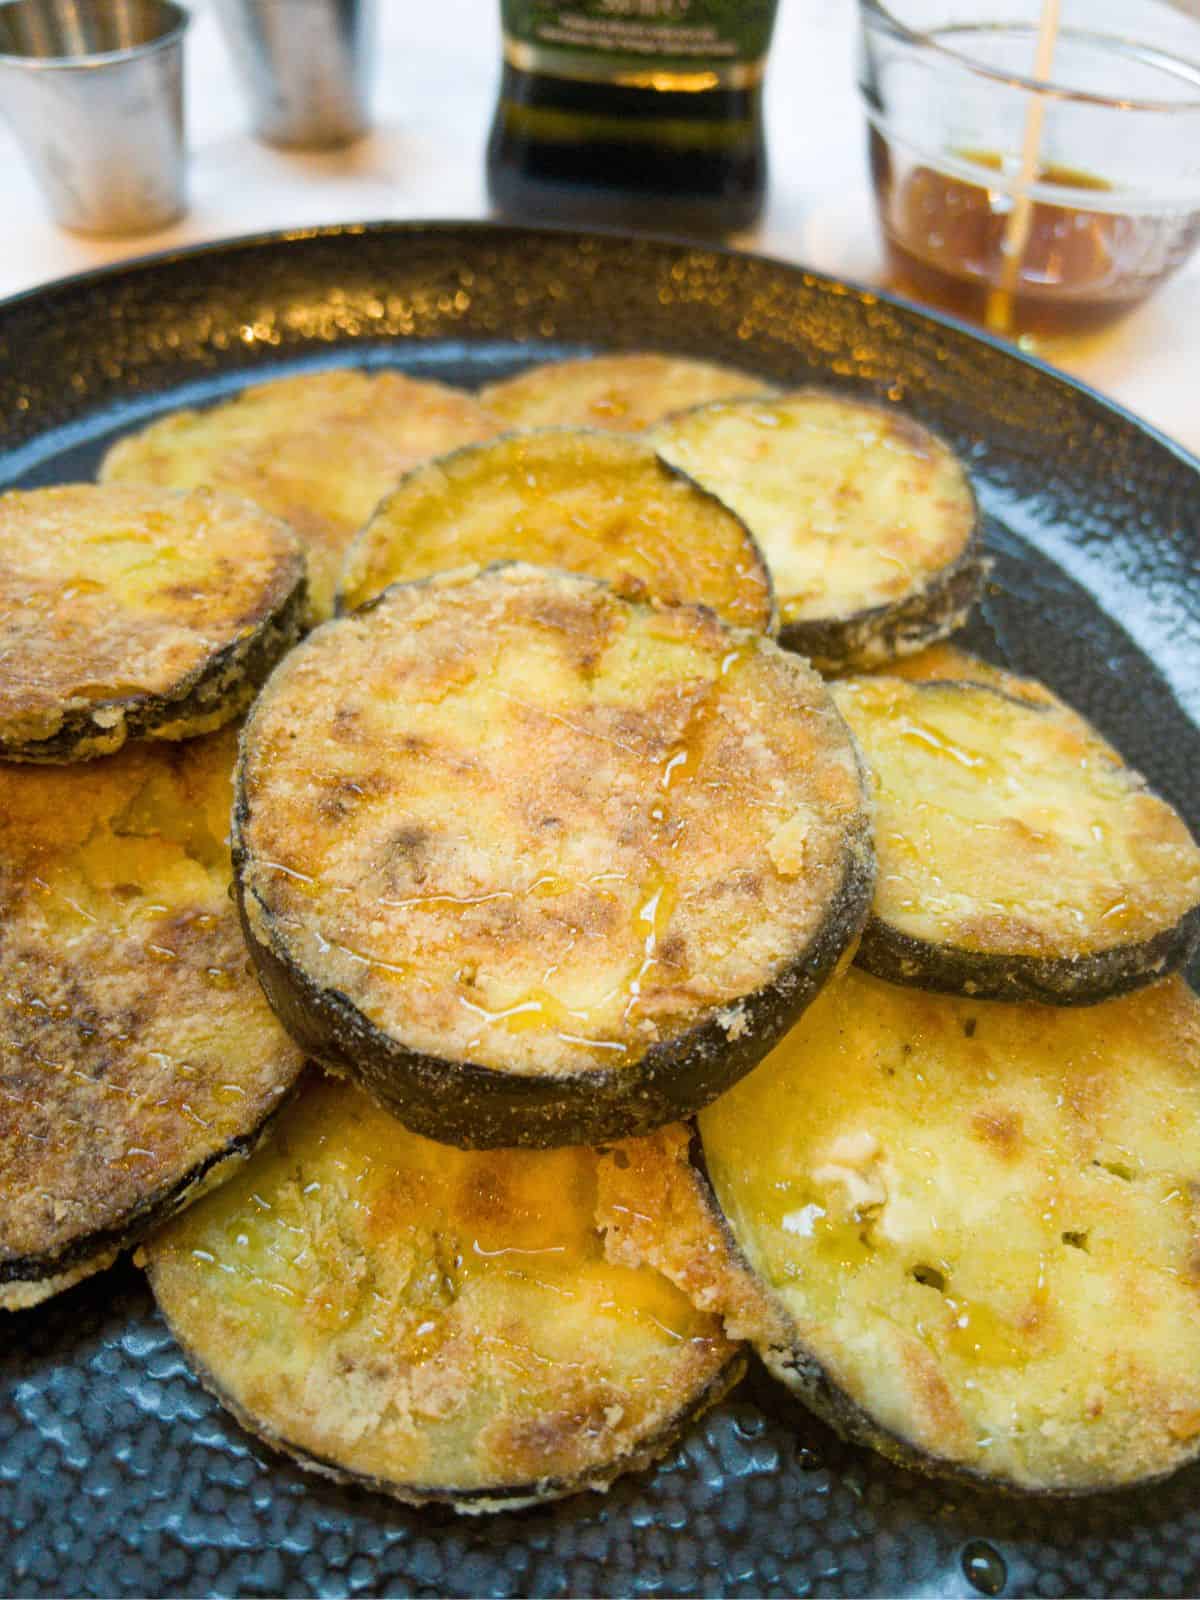 Close up of fried aubergine rounds on a plate.